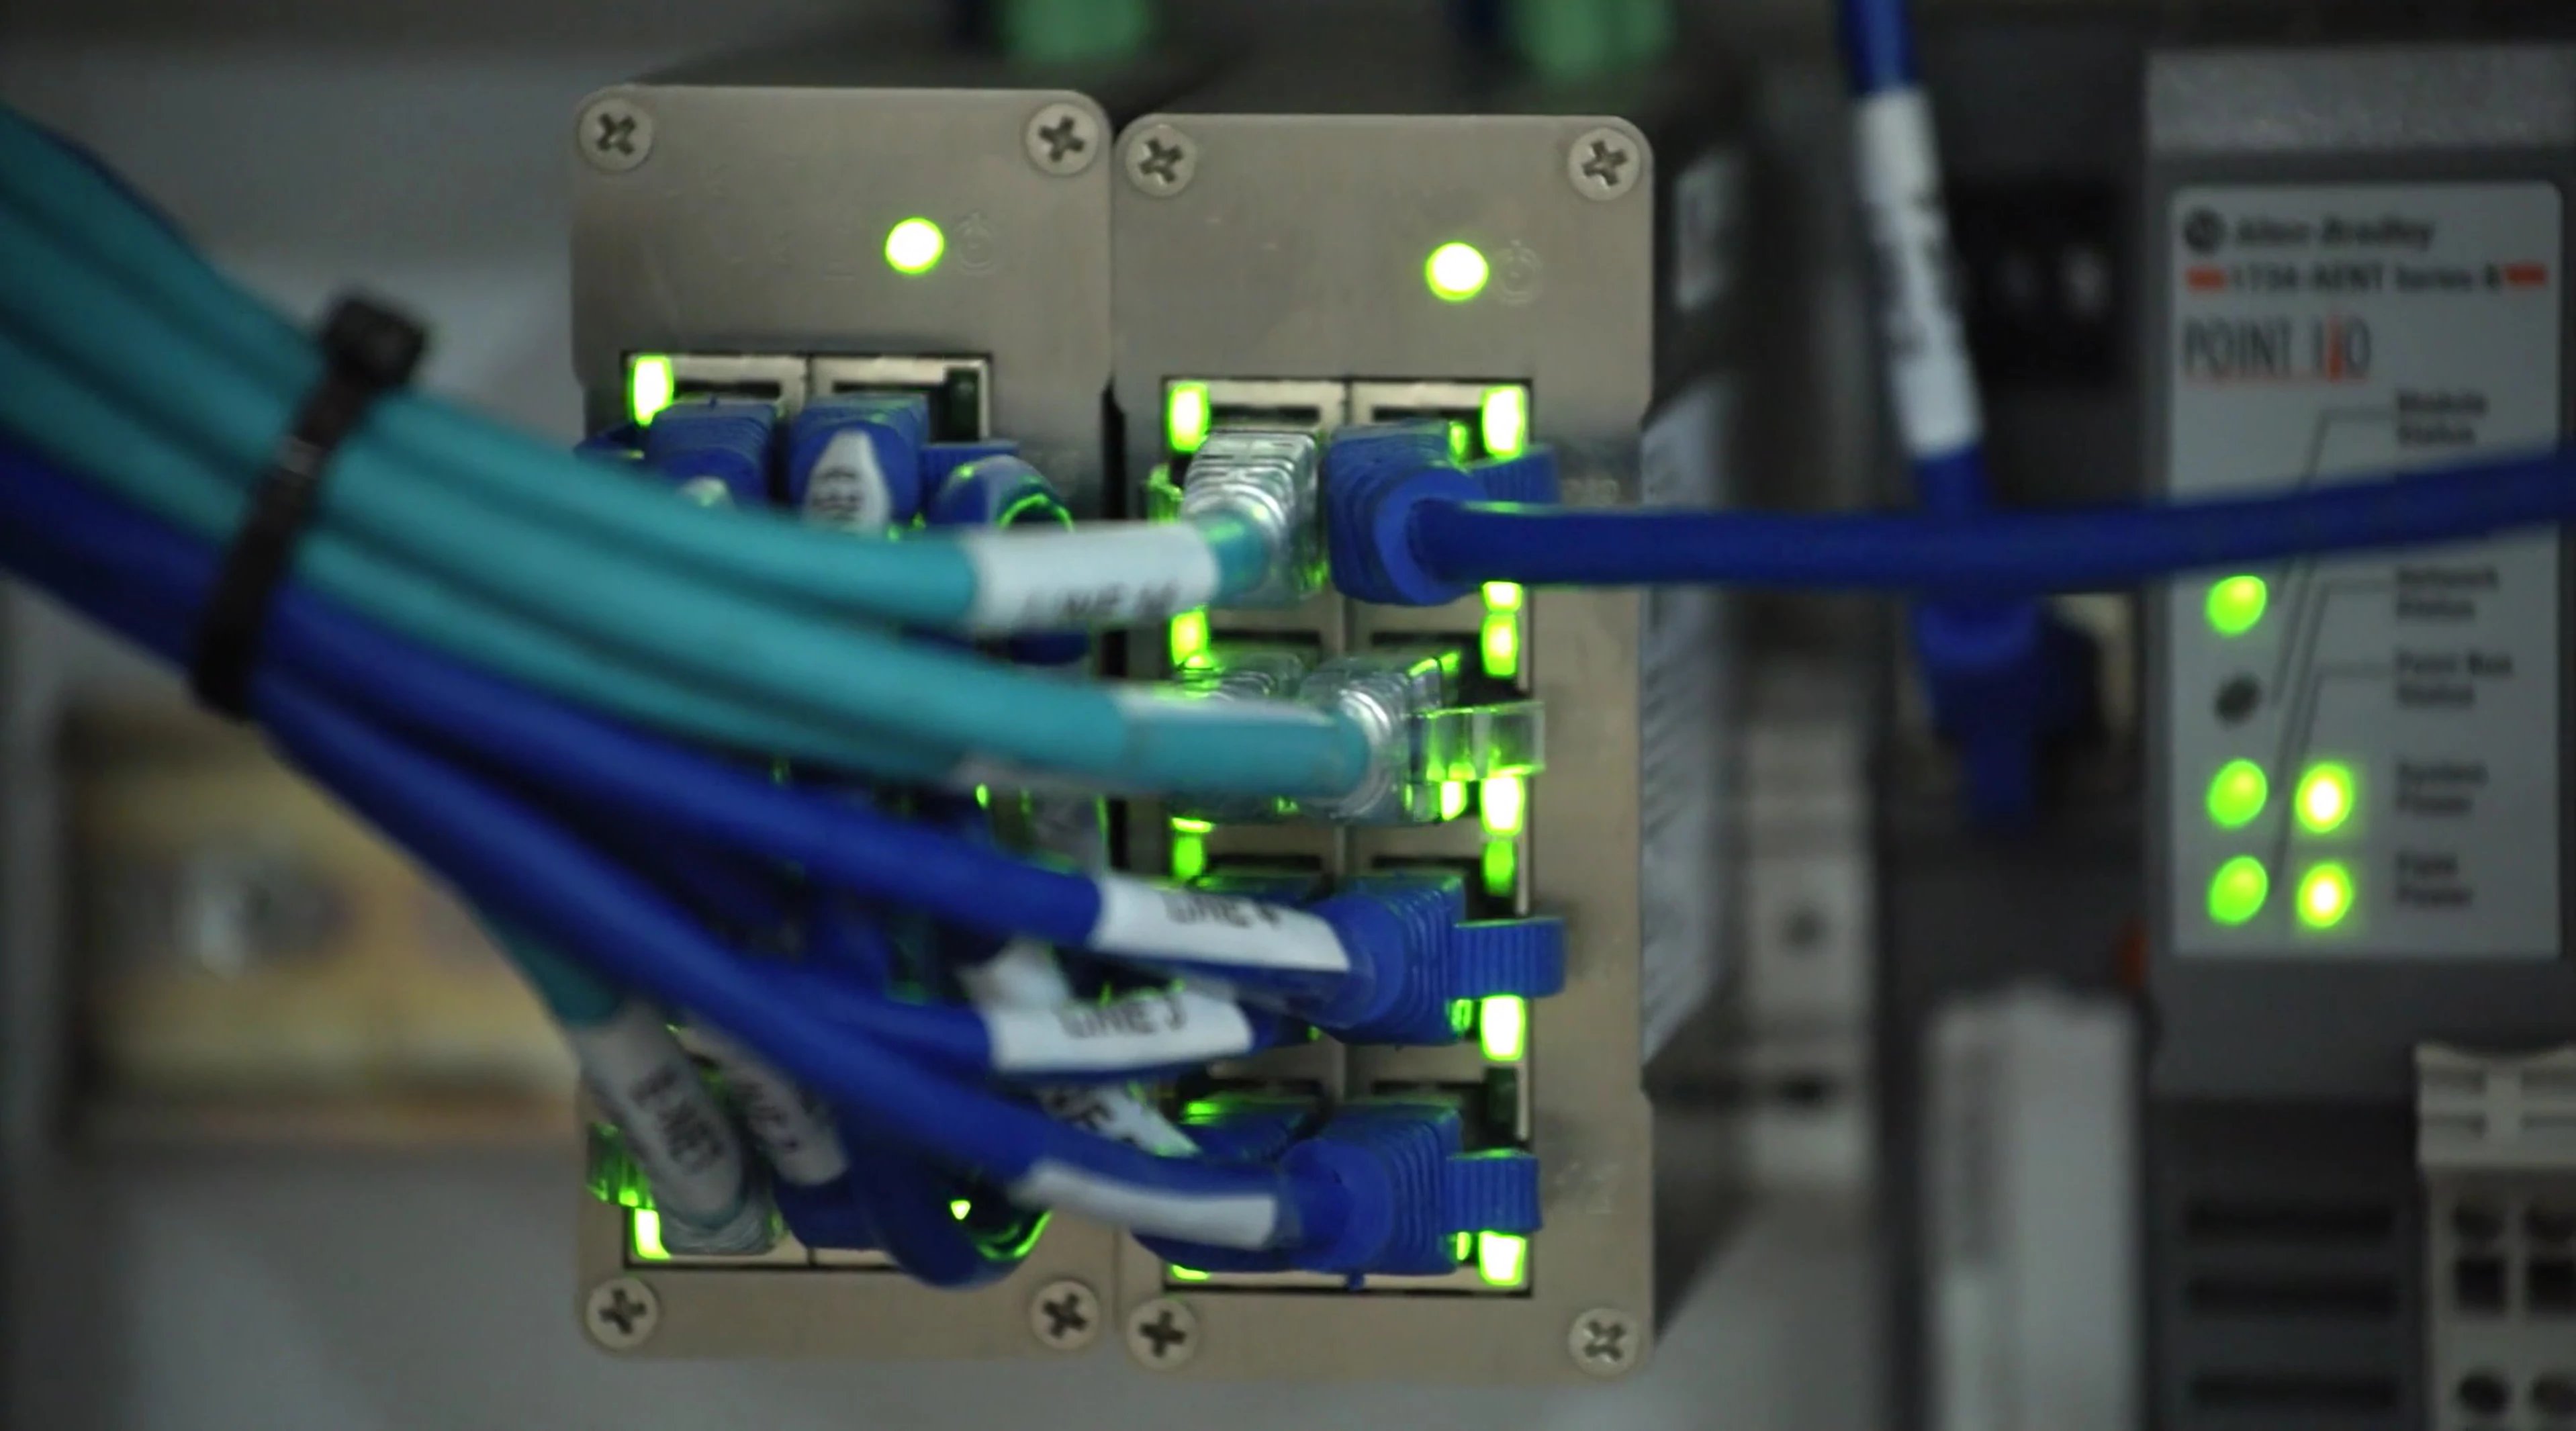 Ethernet cables plugged into industrial network switches.